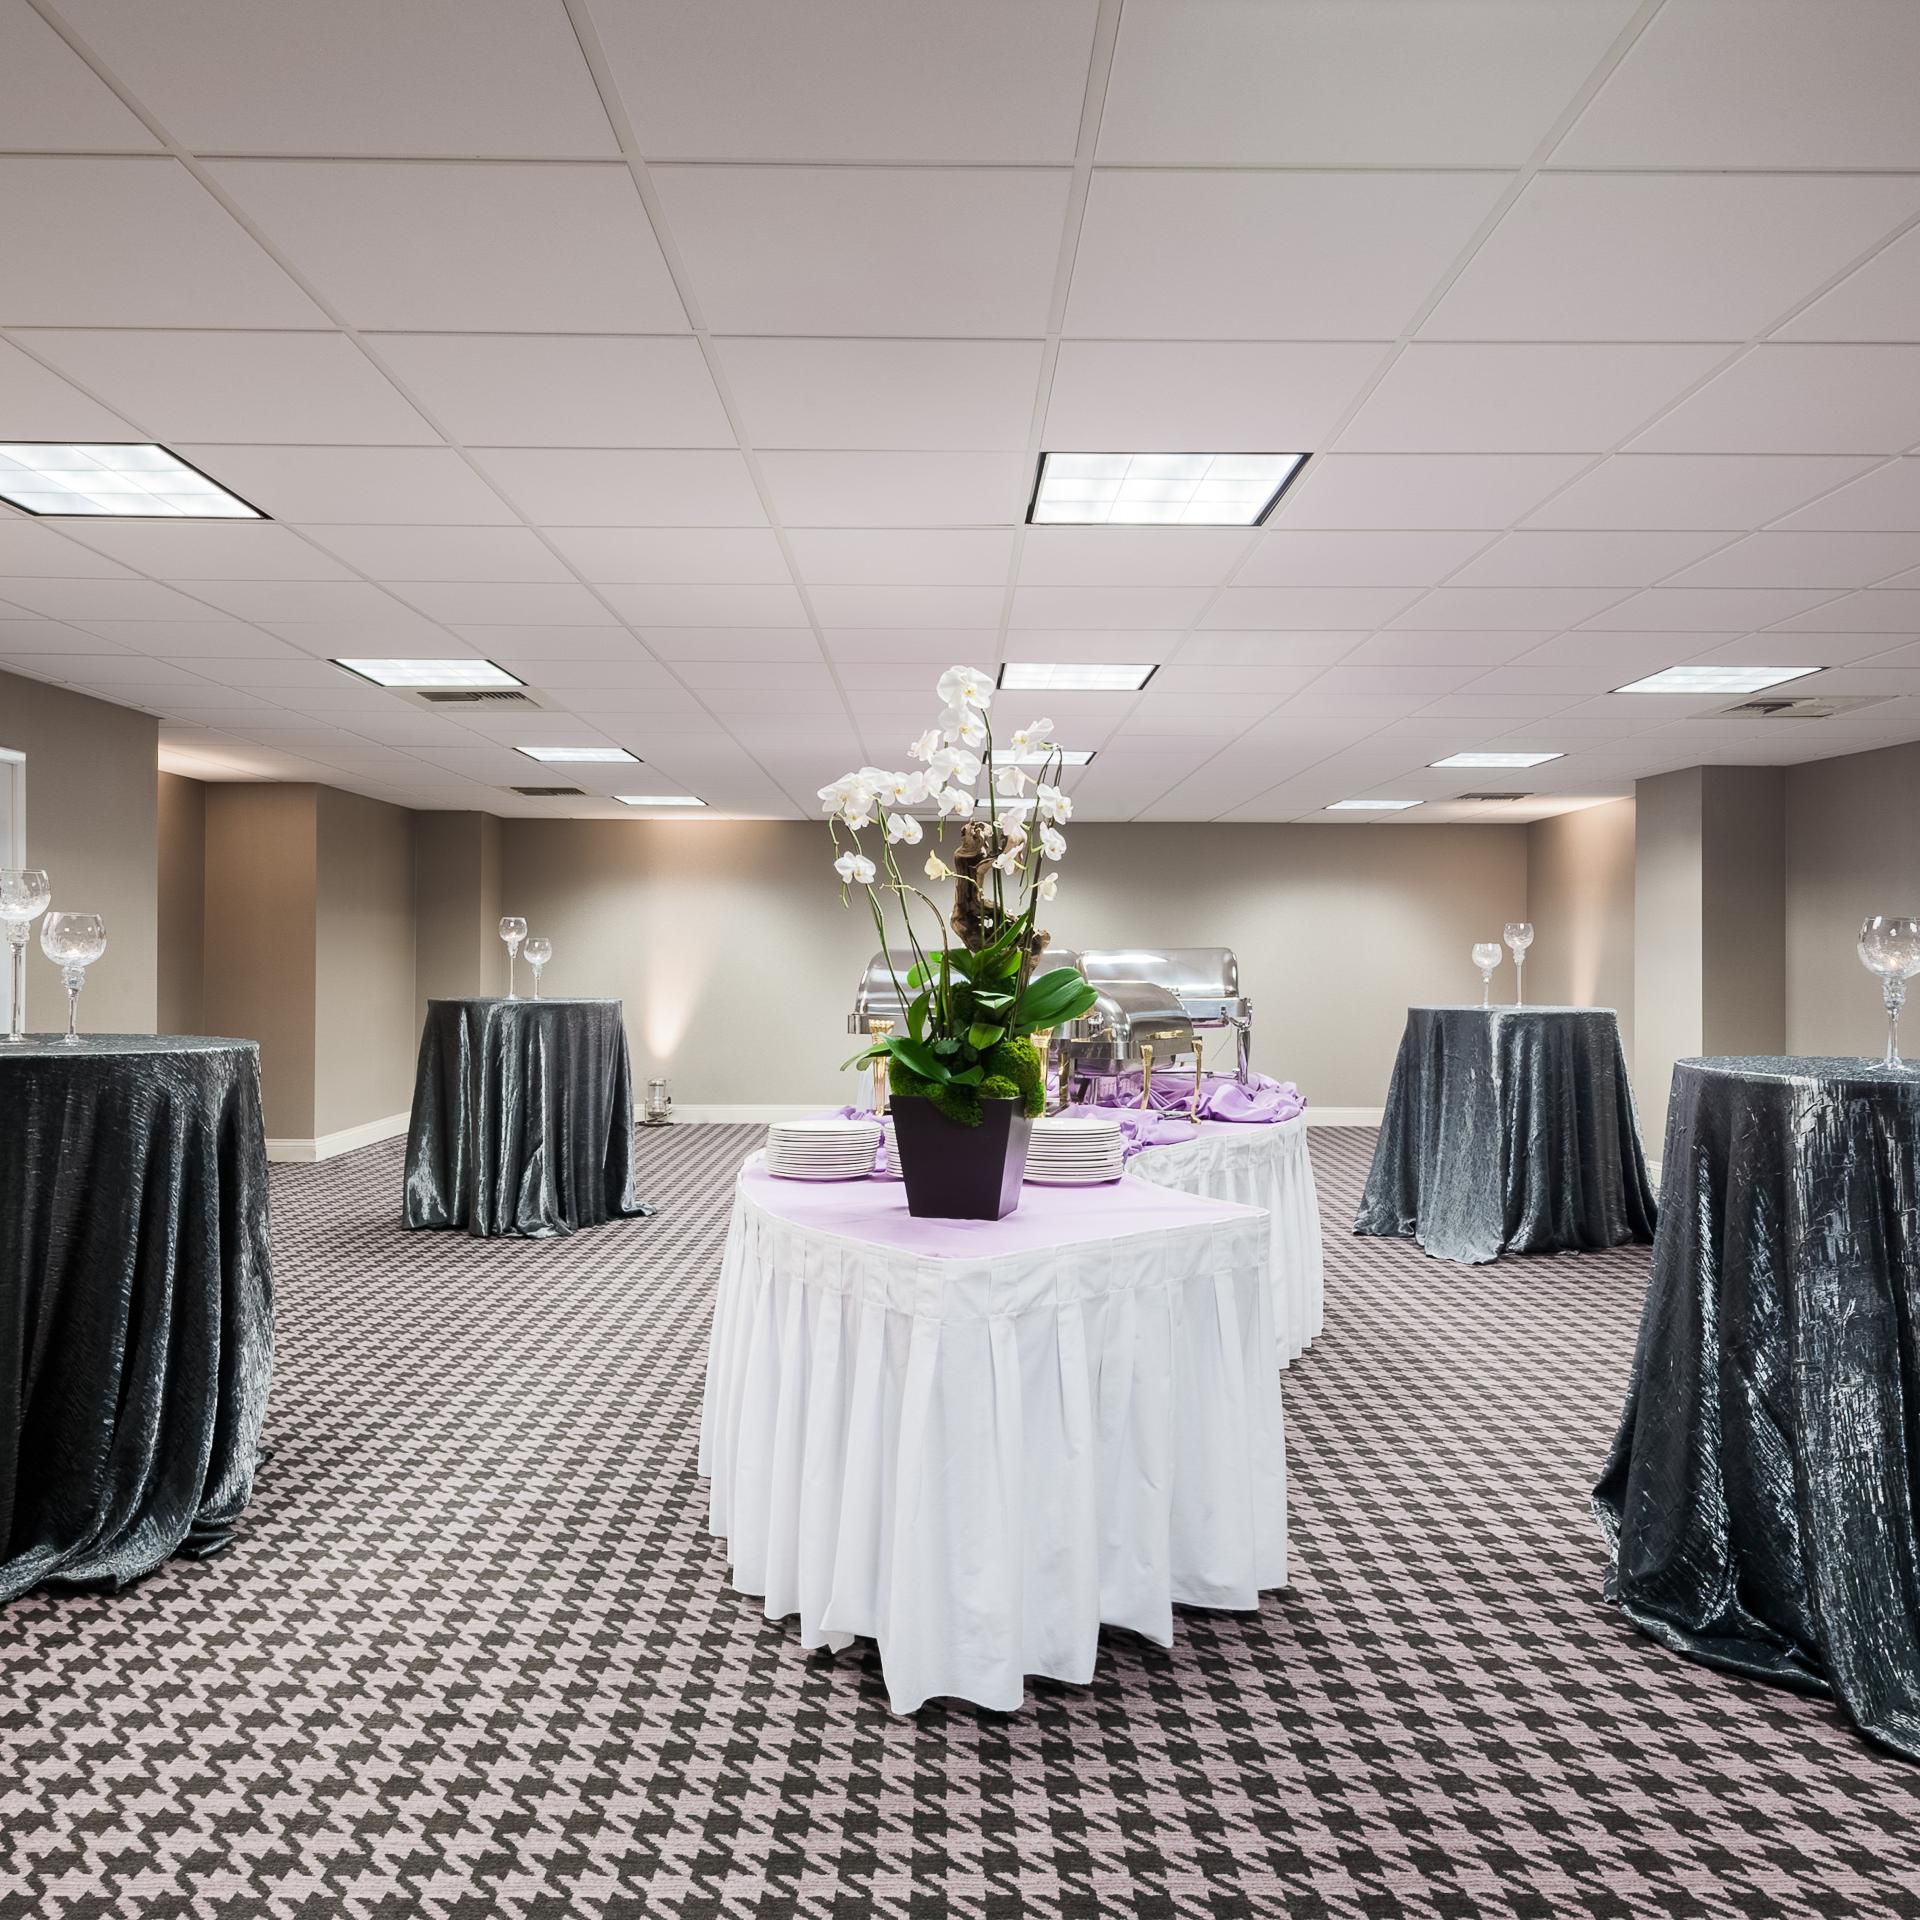 The Diamond room is perfect for meetings, trainings and receptions